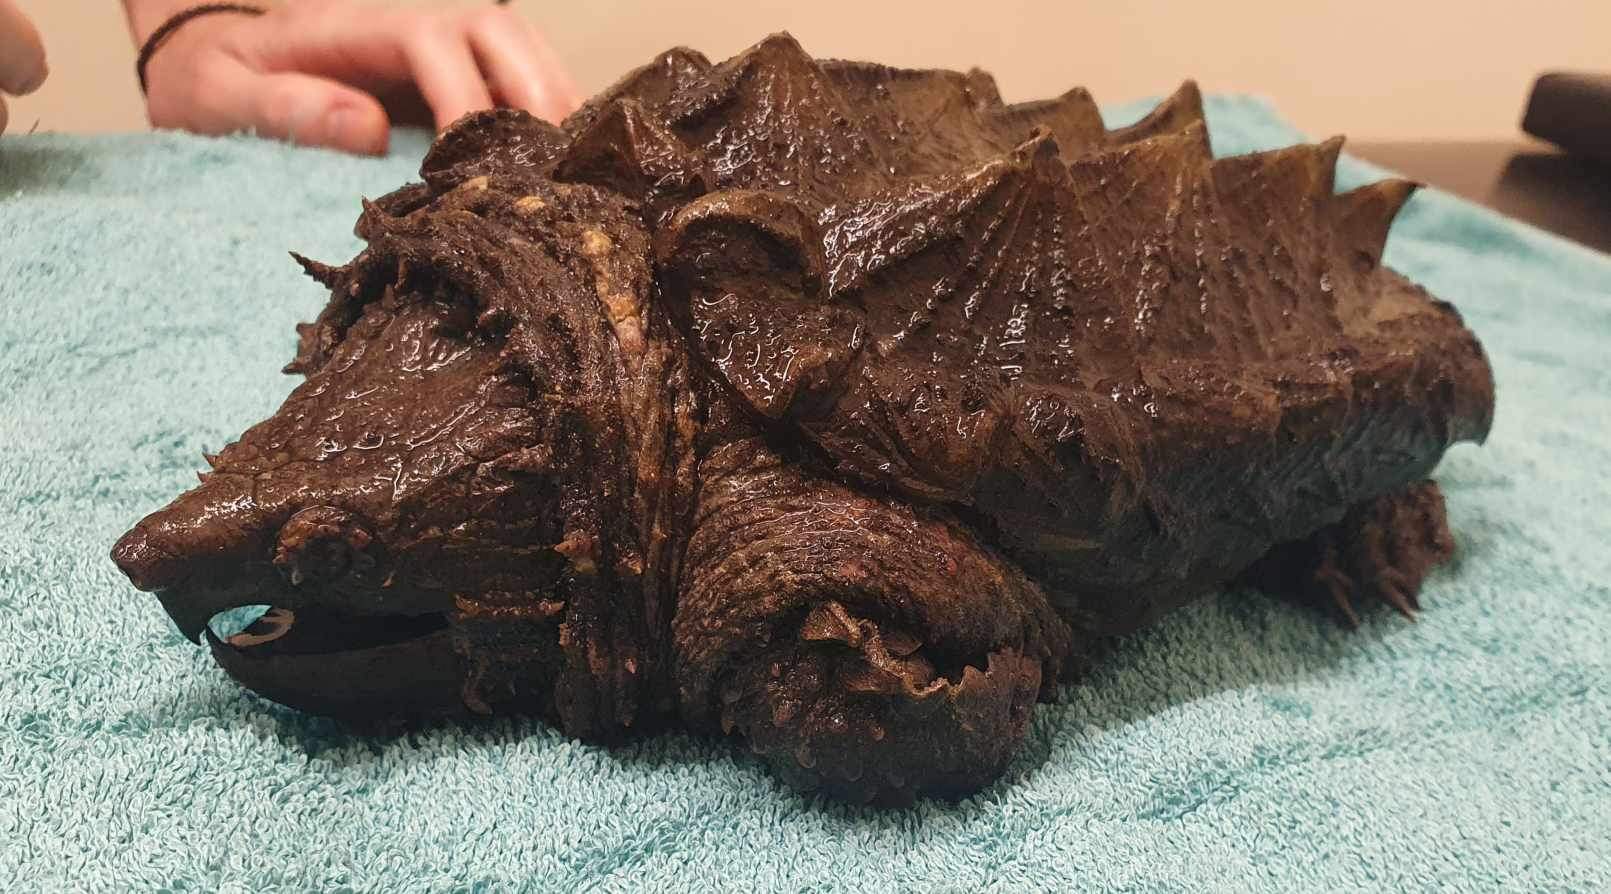 A photo of the alligator snapping turtle